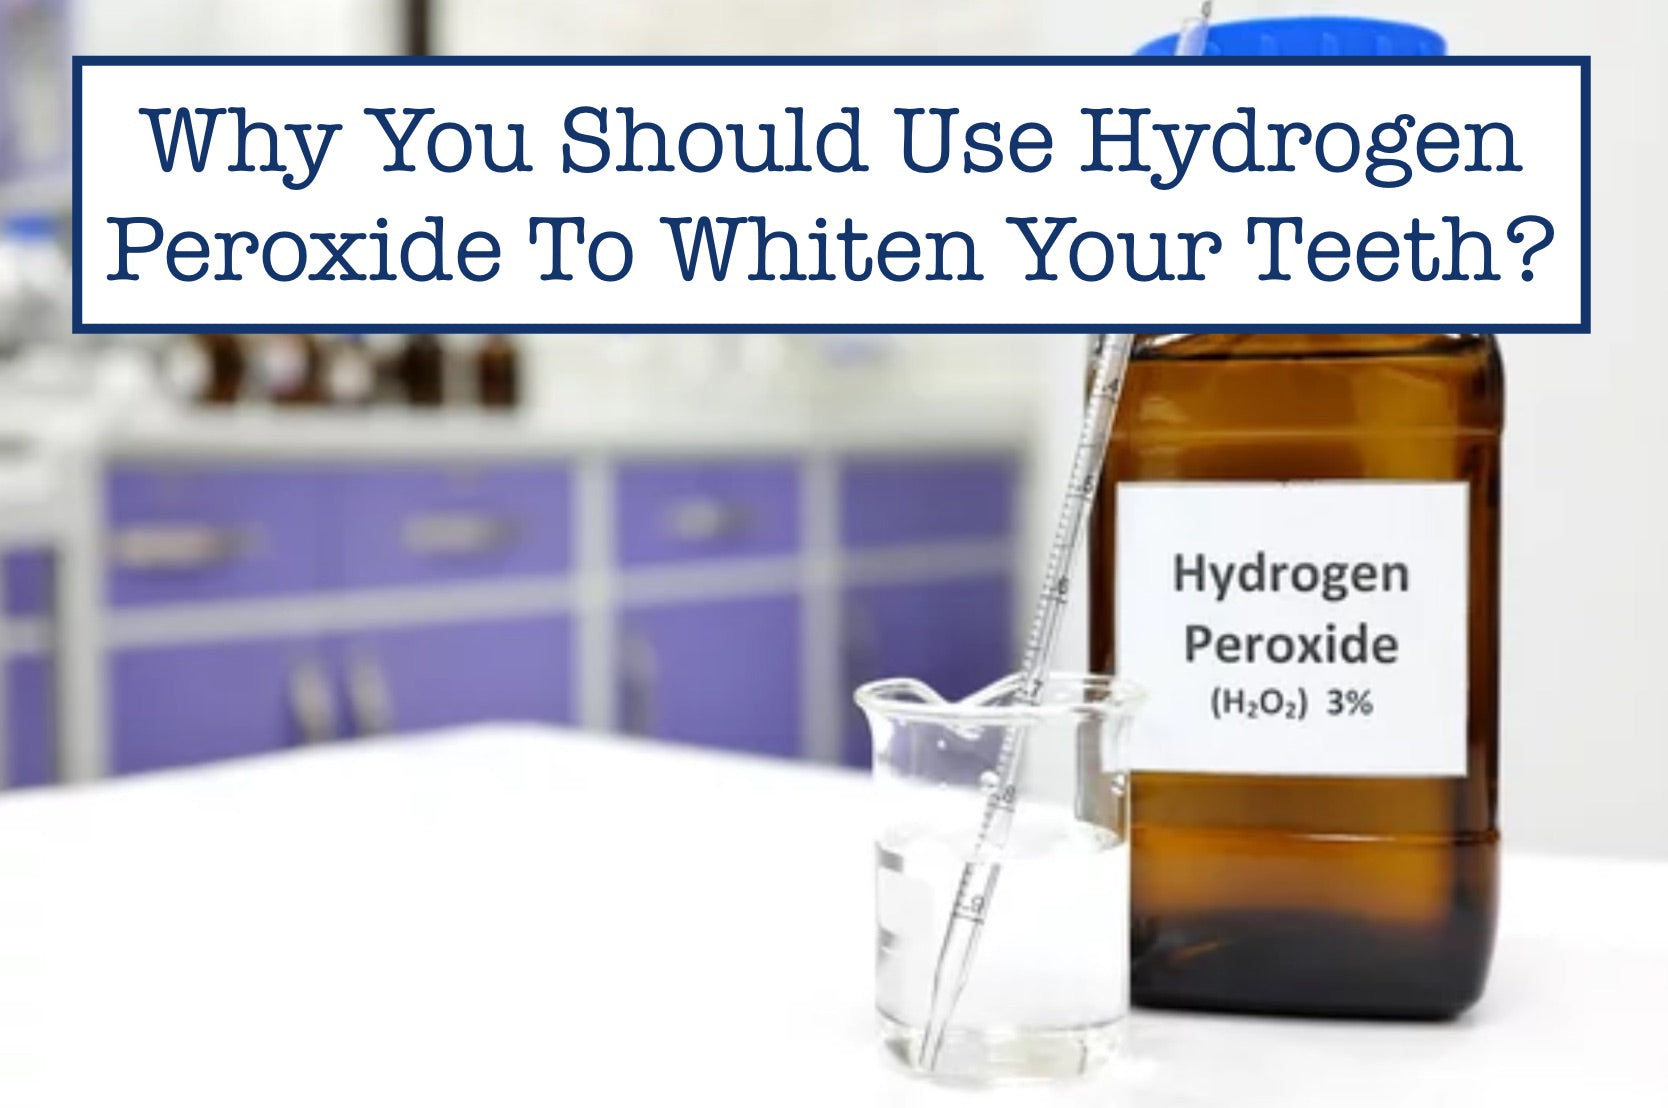 Why You Should Use Hydrogen Peroxide To Whiten Your Teeth